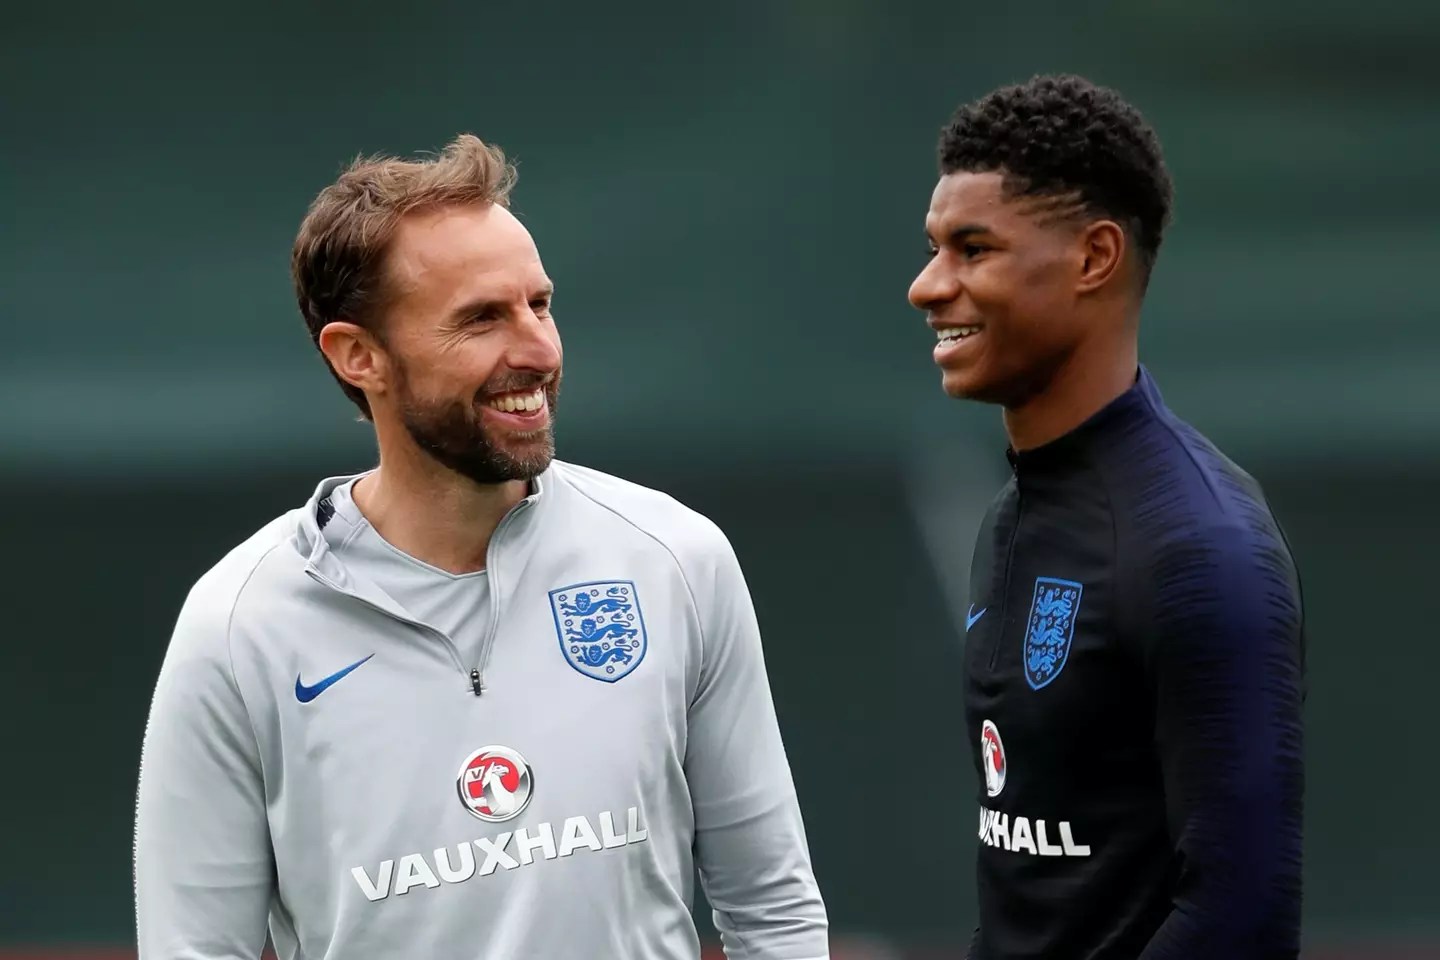 Southgate is reportedly set to drop Rashford from his England squad (Image: PA)